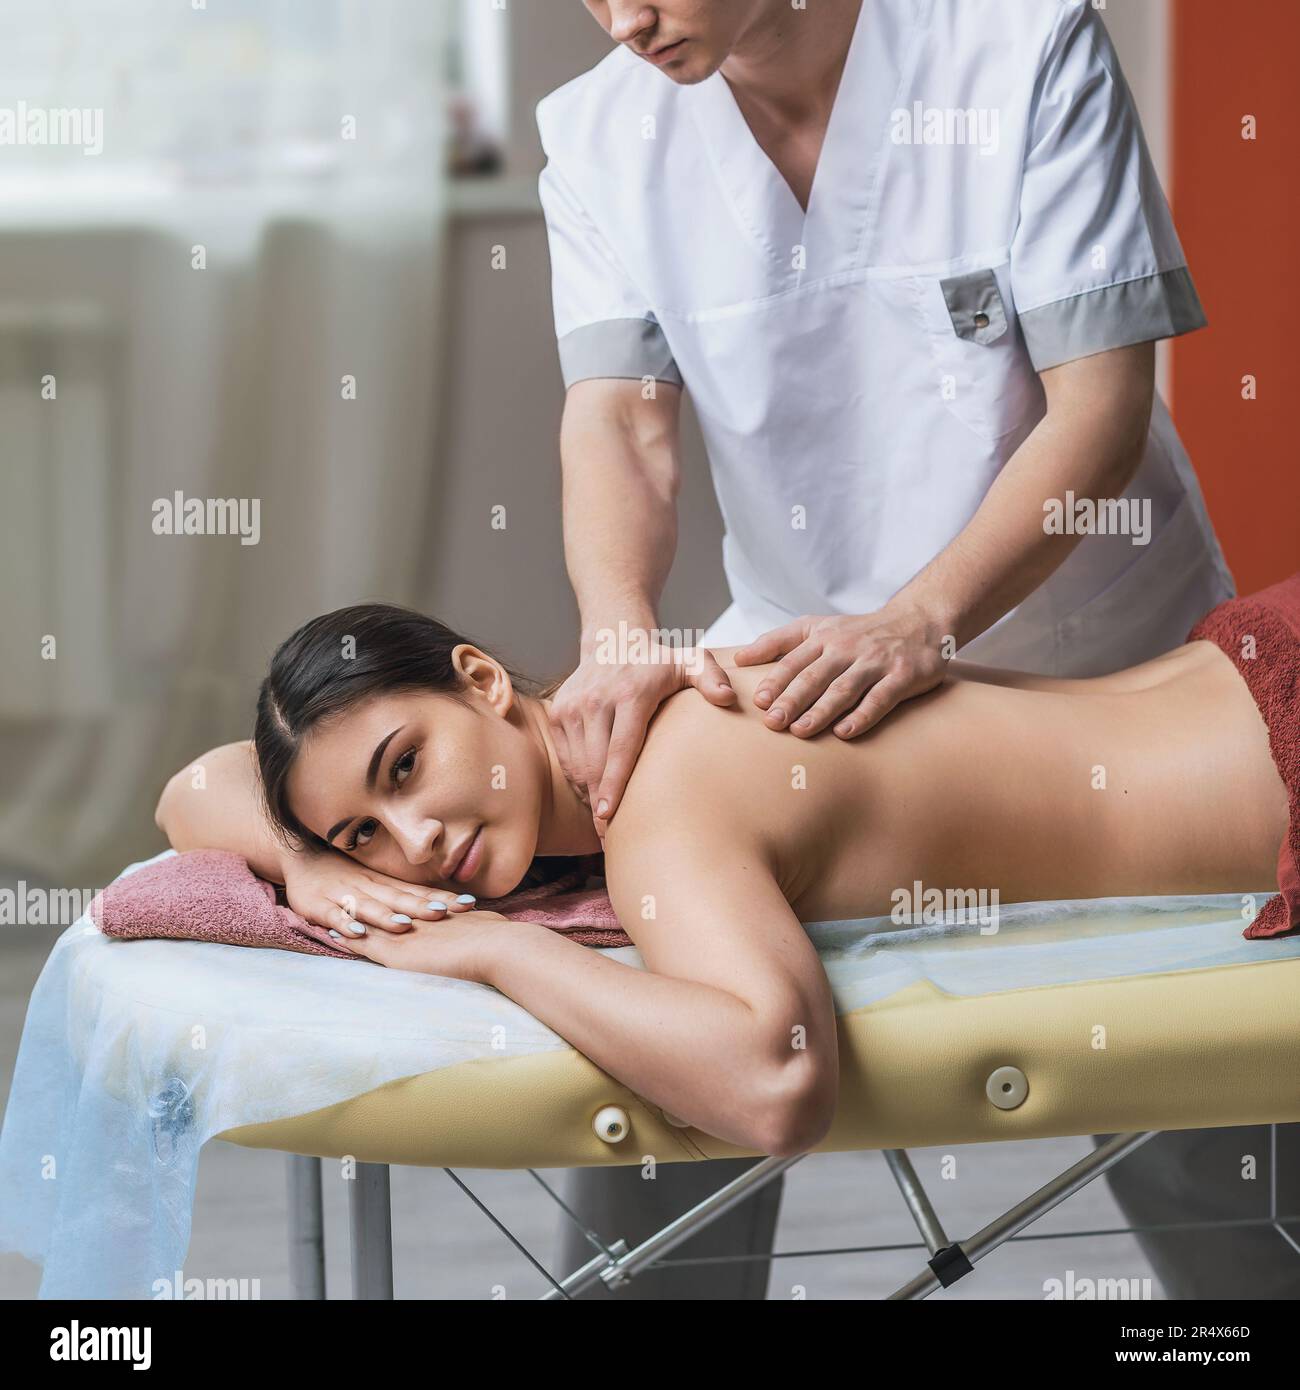 https://c8.alamy.com/comp/2R4X66D/the-masseur-conducts-a-therapy-session-for-a-client-massages-the-back-and-cervical-region-of-a-young-brunette-girl-2R4X66D.jpg